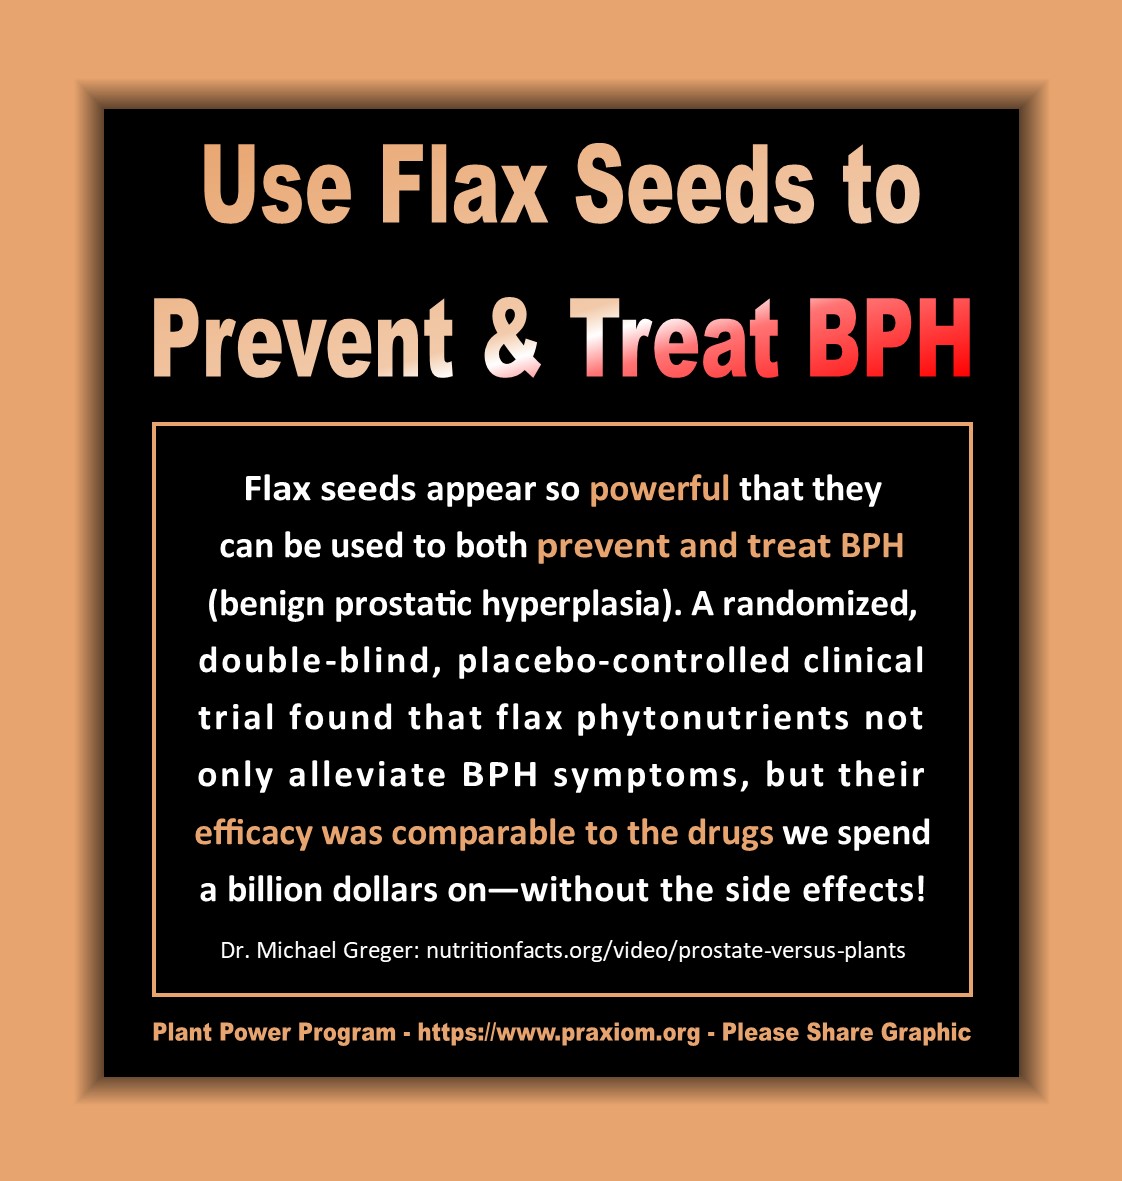 Use Flax Seeds to Prevent and Treat BPH (Benign Prostatic Hyperplasia) - Dr. Michael Greger